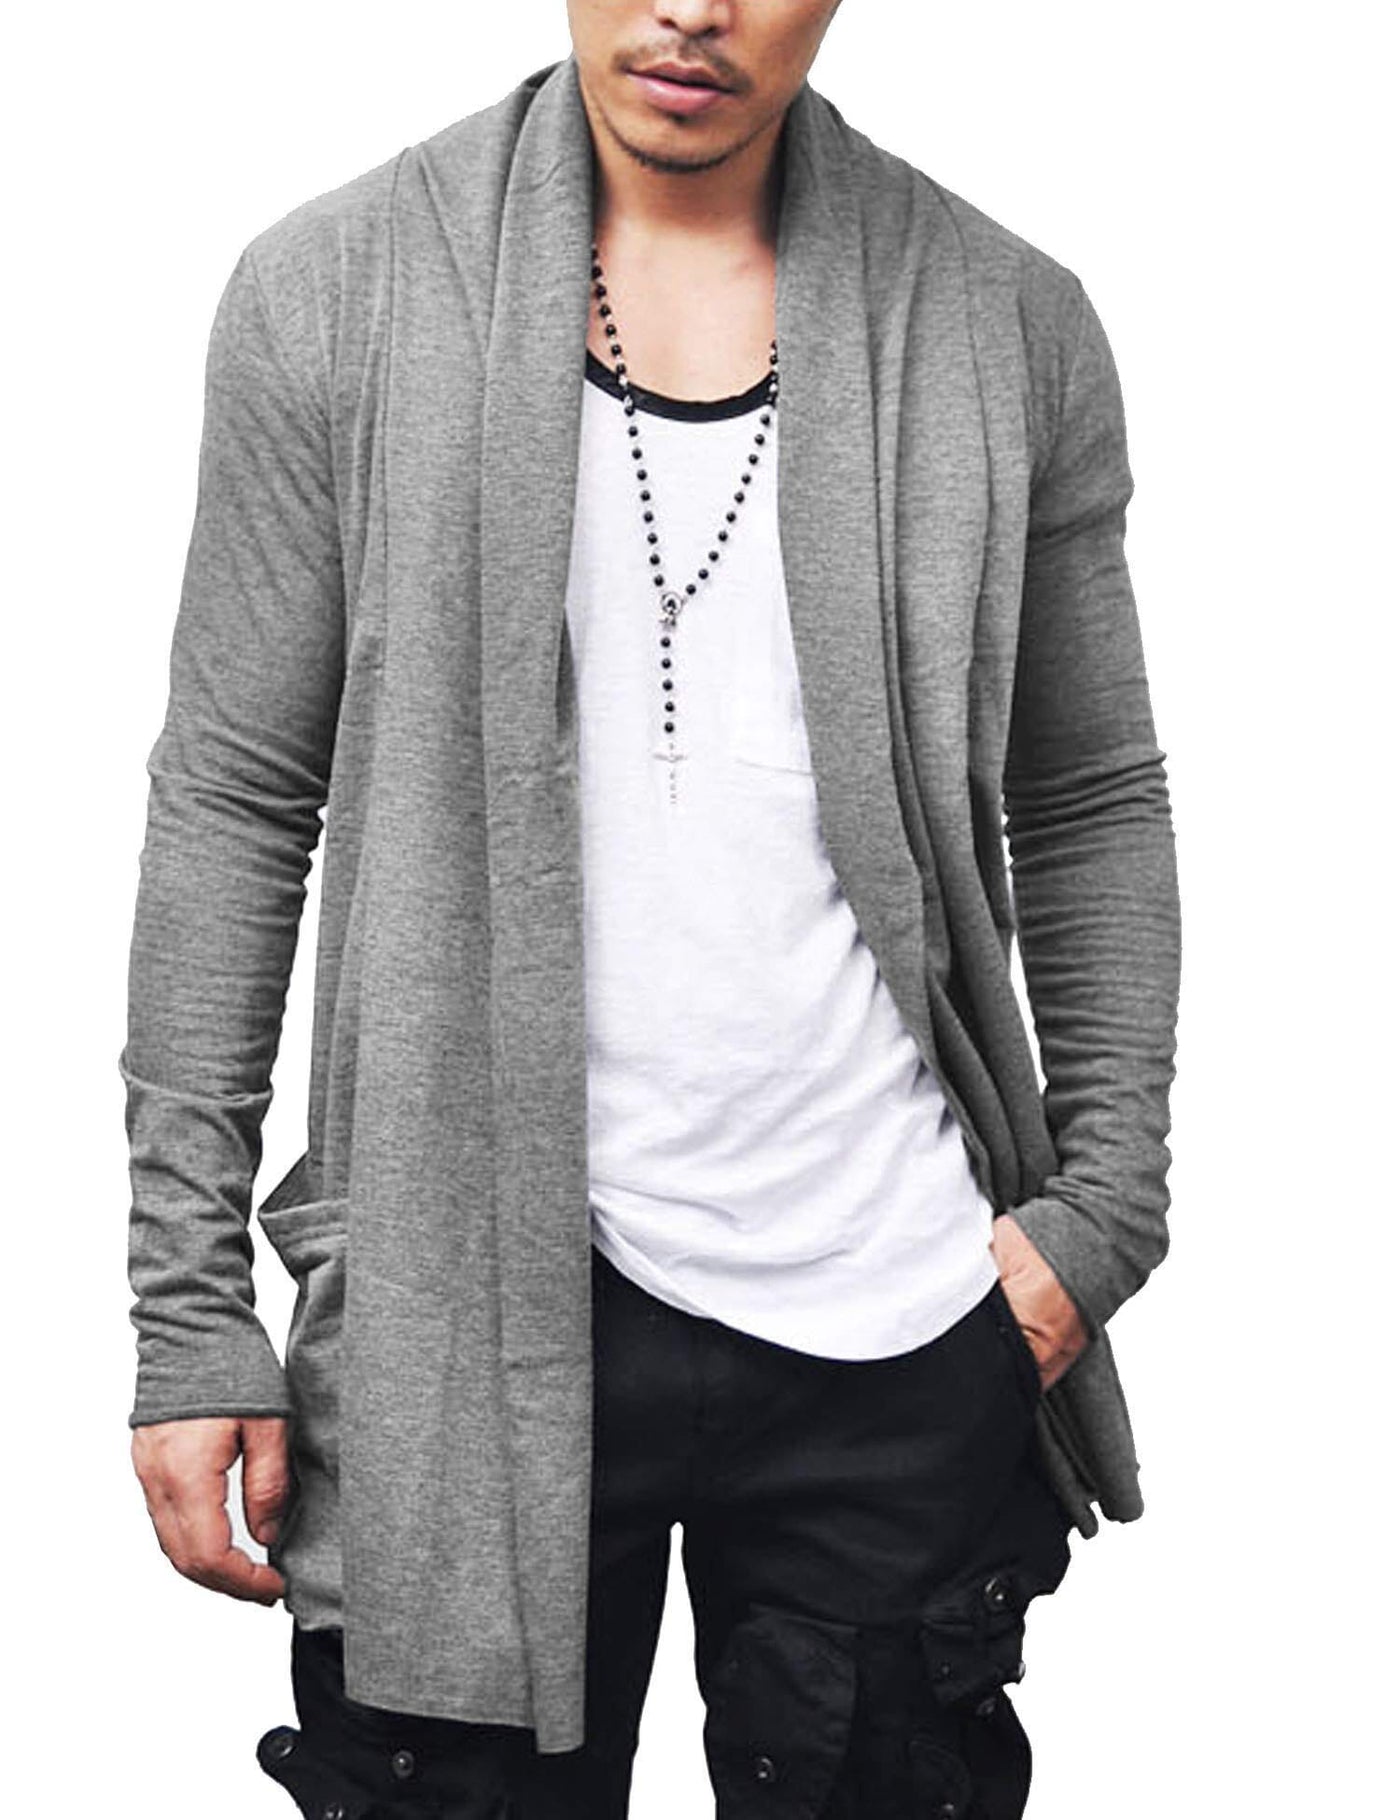 Ruffle Shawl Collar Knitted Cardigan (US Only) Cardigans COOFANDY Store Grey S 